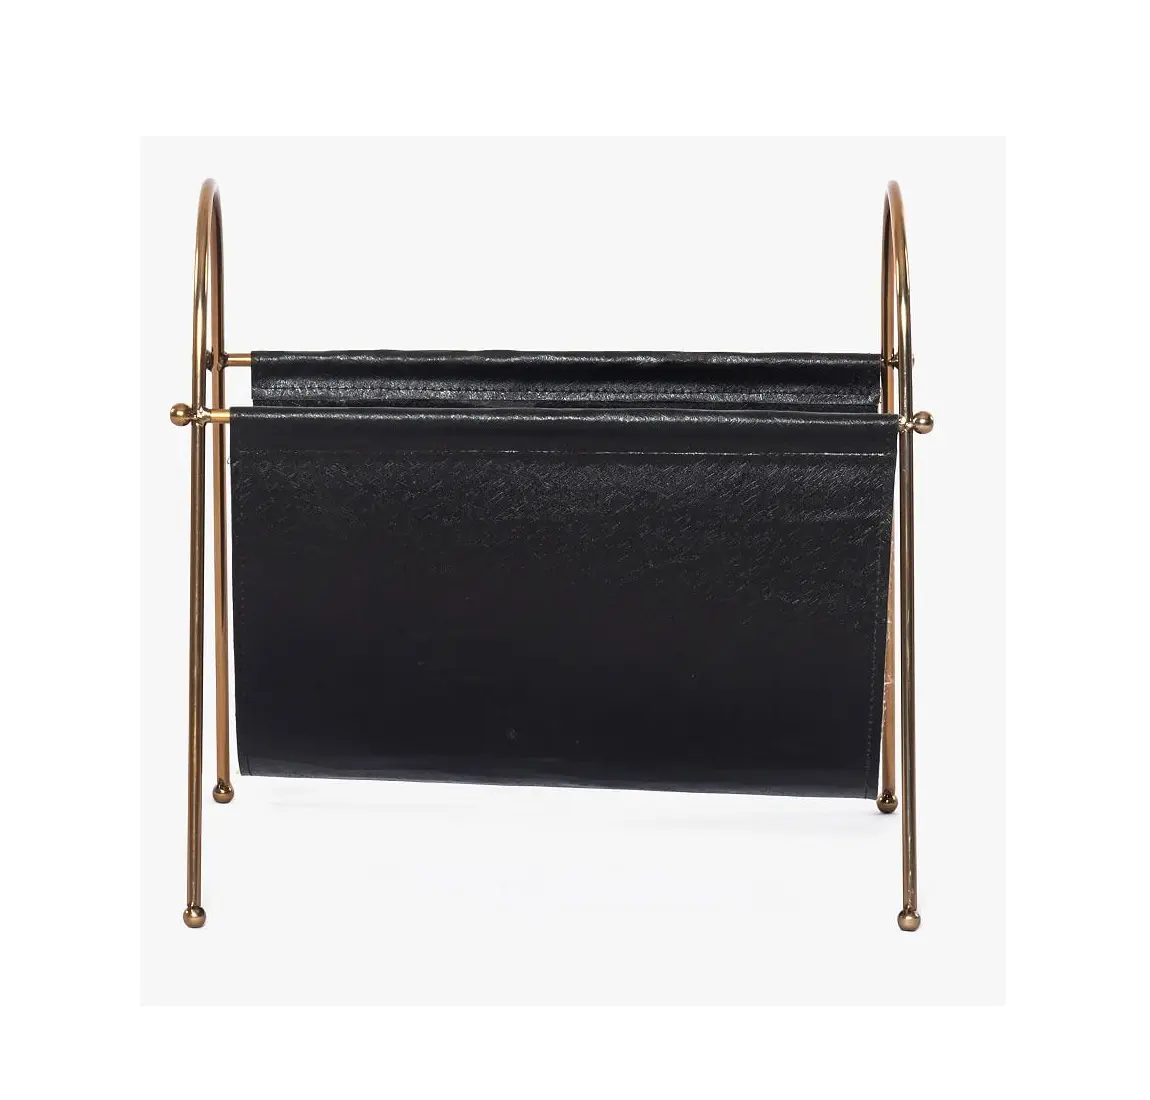 Modern Black Leather Magazine Rack with Handle for Bedroom Metal Magazine Holder Luxury Design Newspaper Books Stand